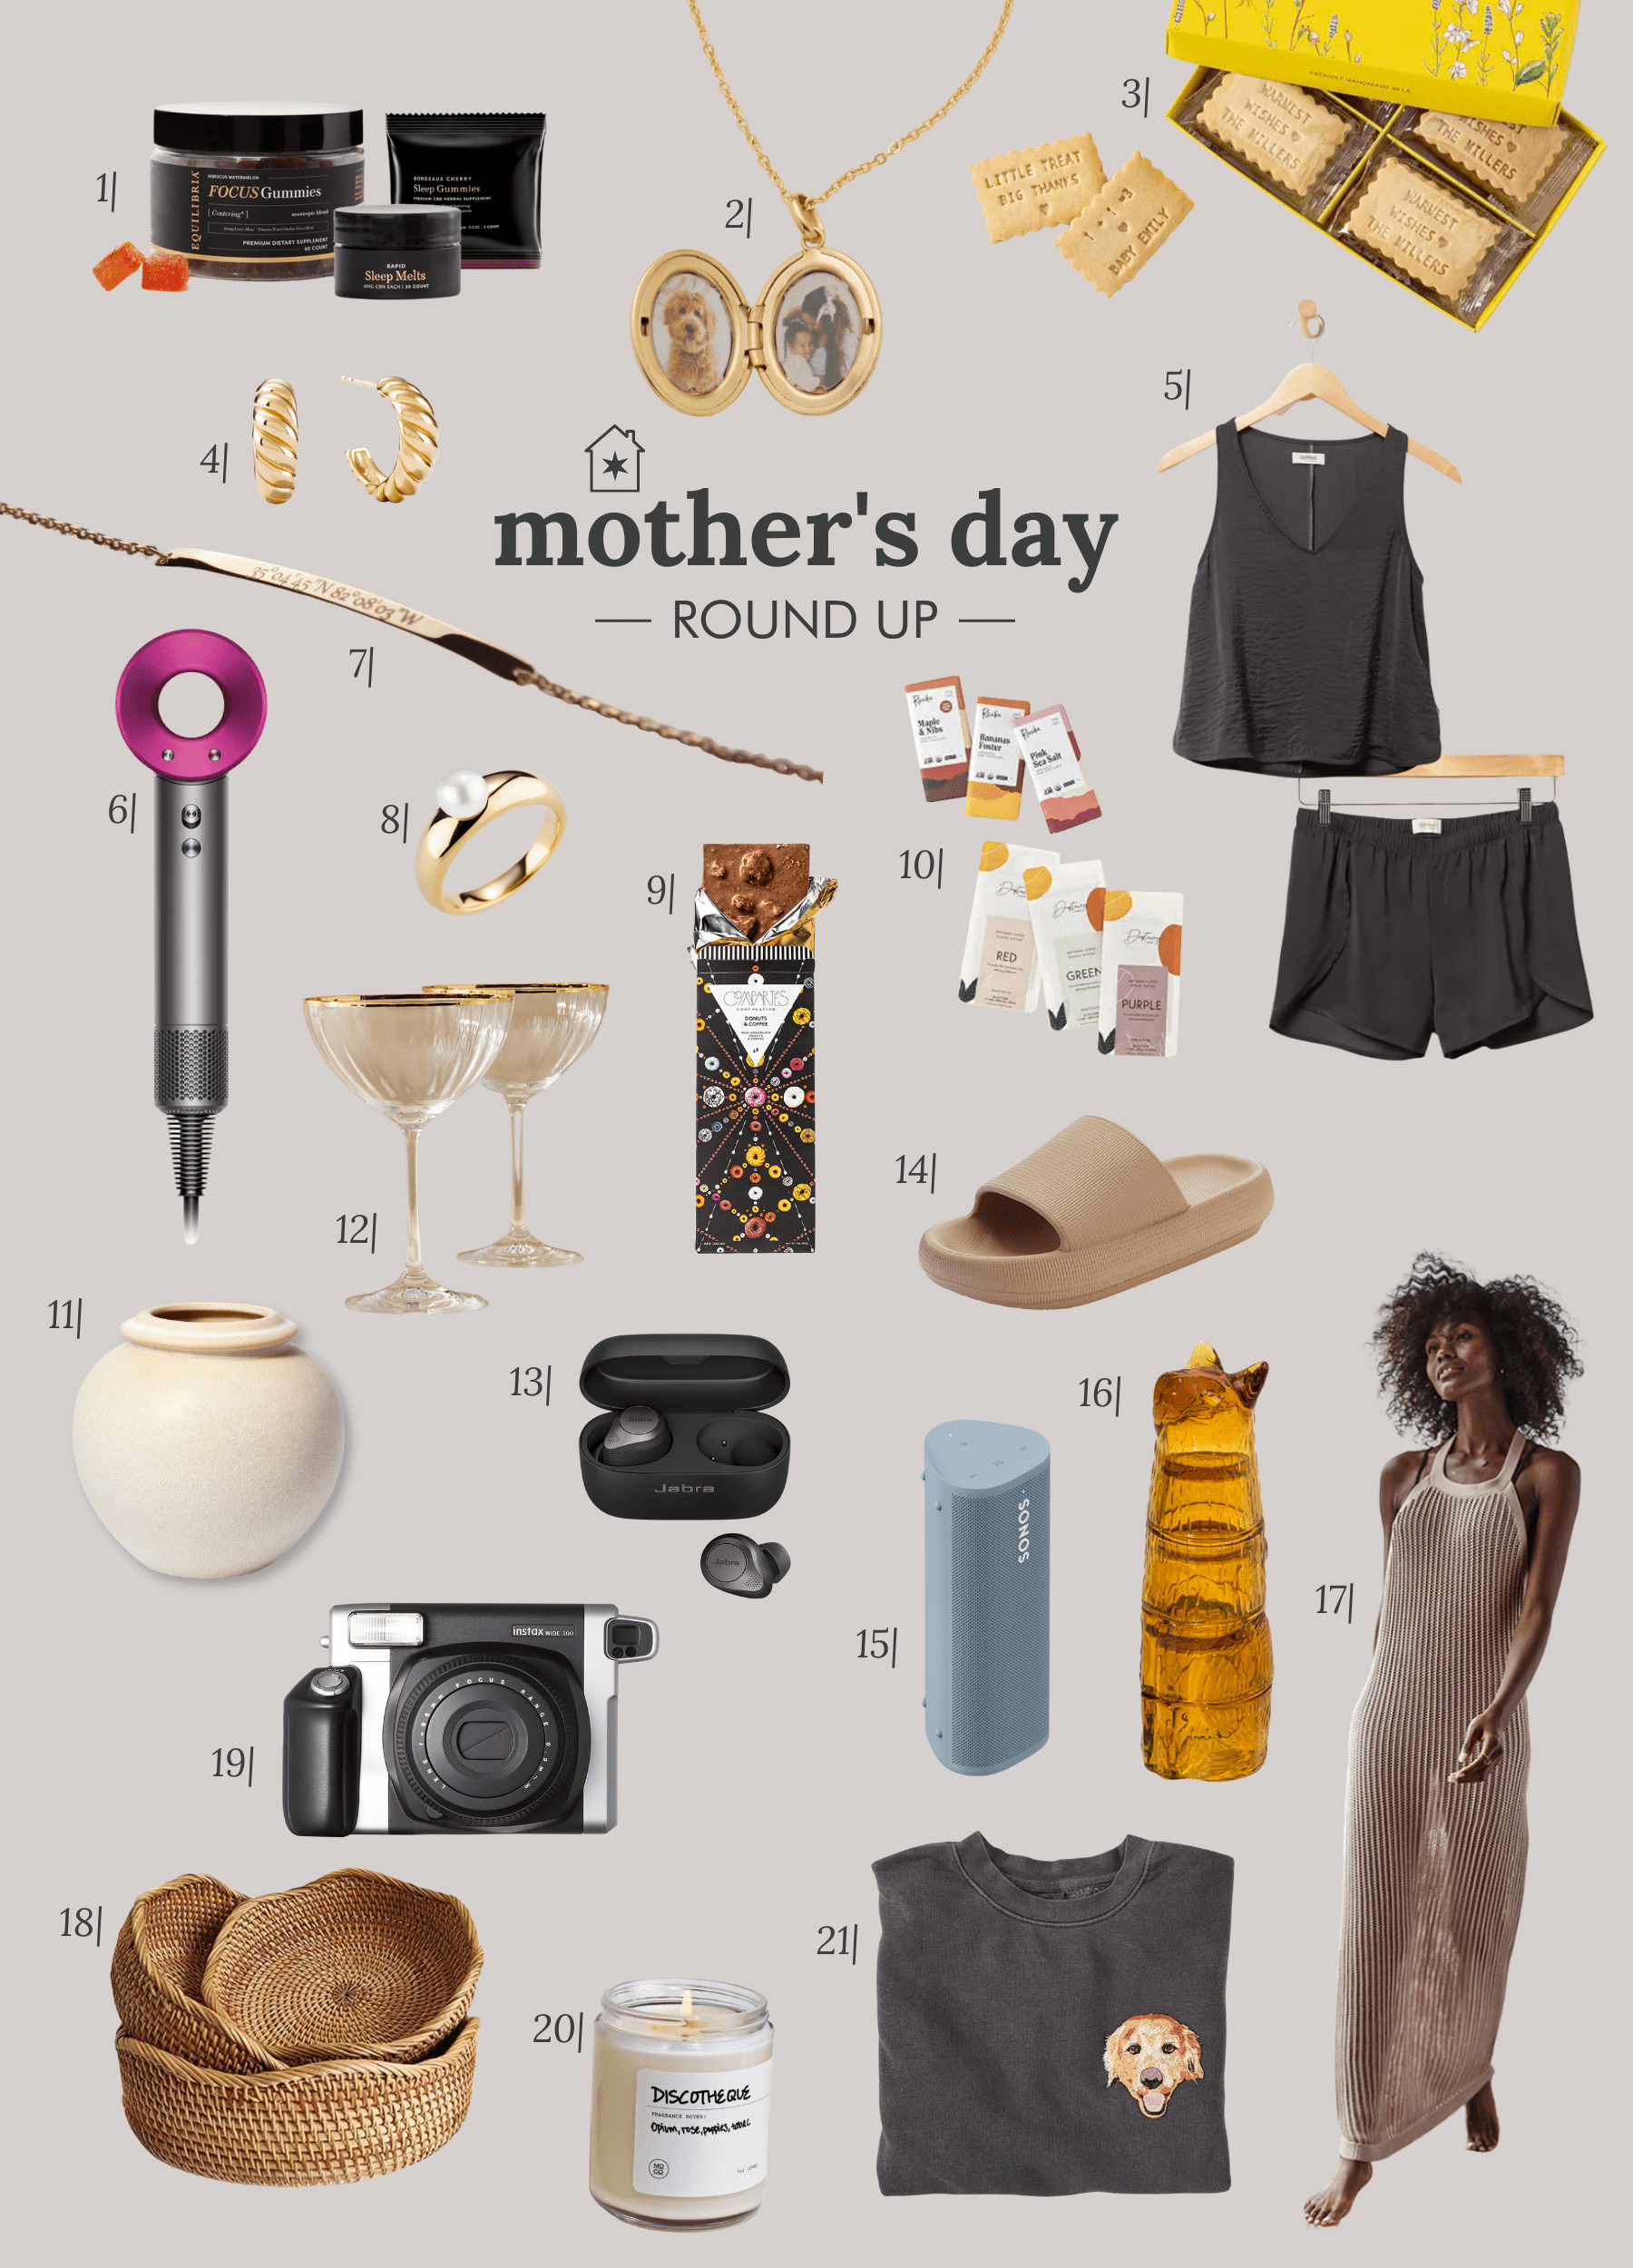 Mother's Day Gift Guide, round up of gift ideas for the mother figure in your life | via Yellow Brick Home